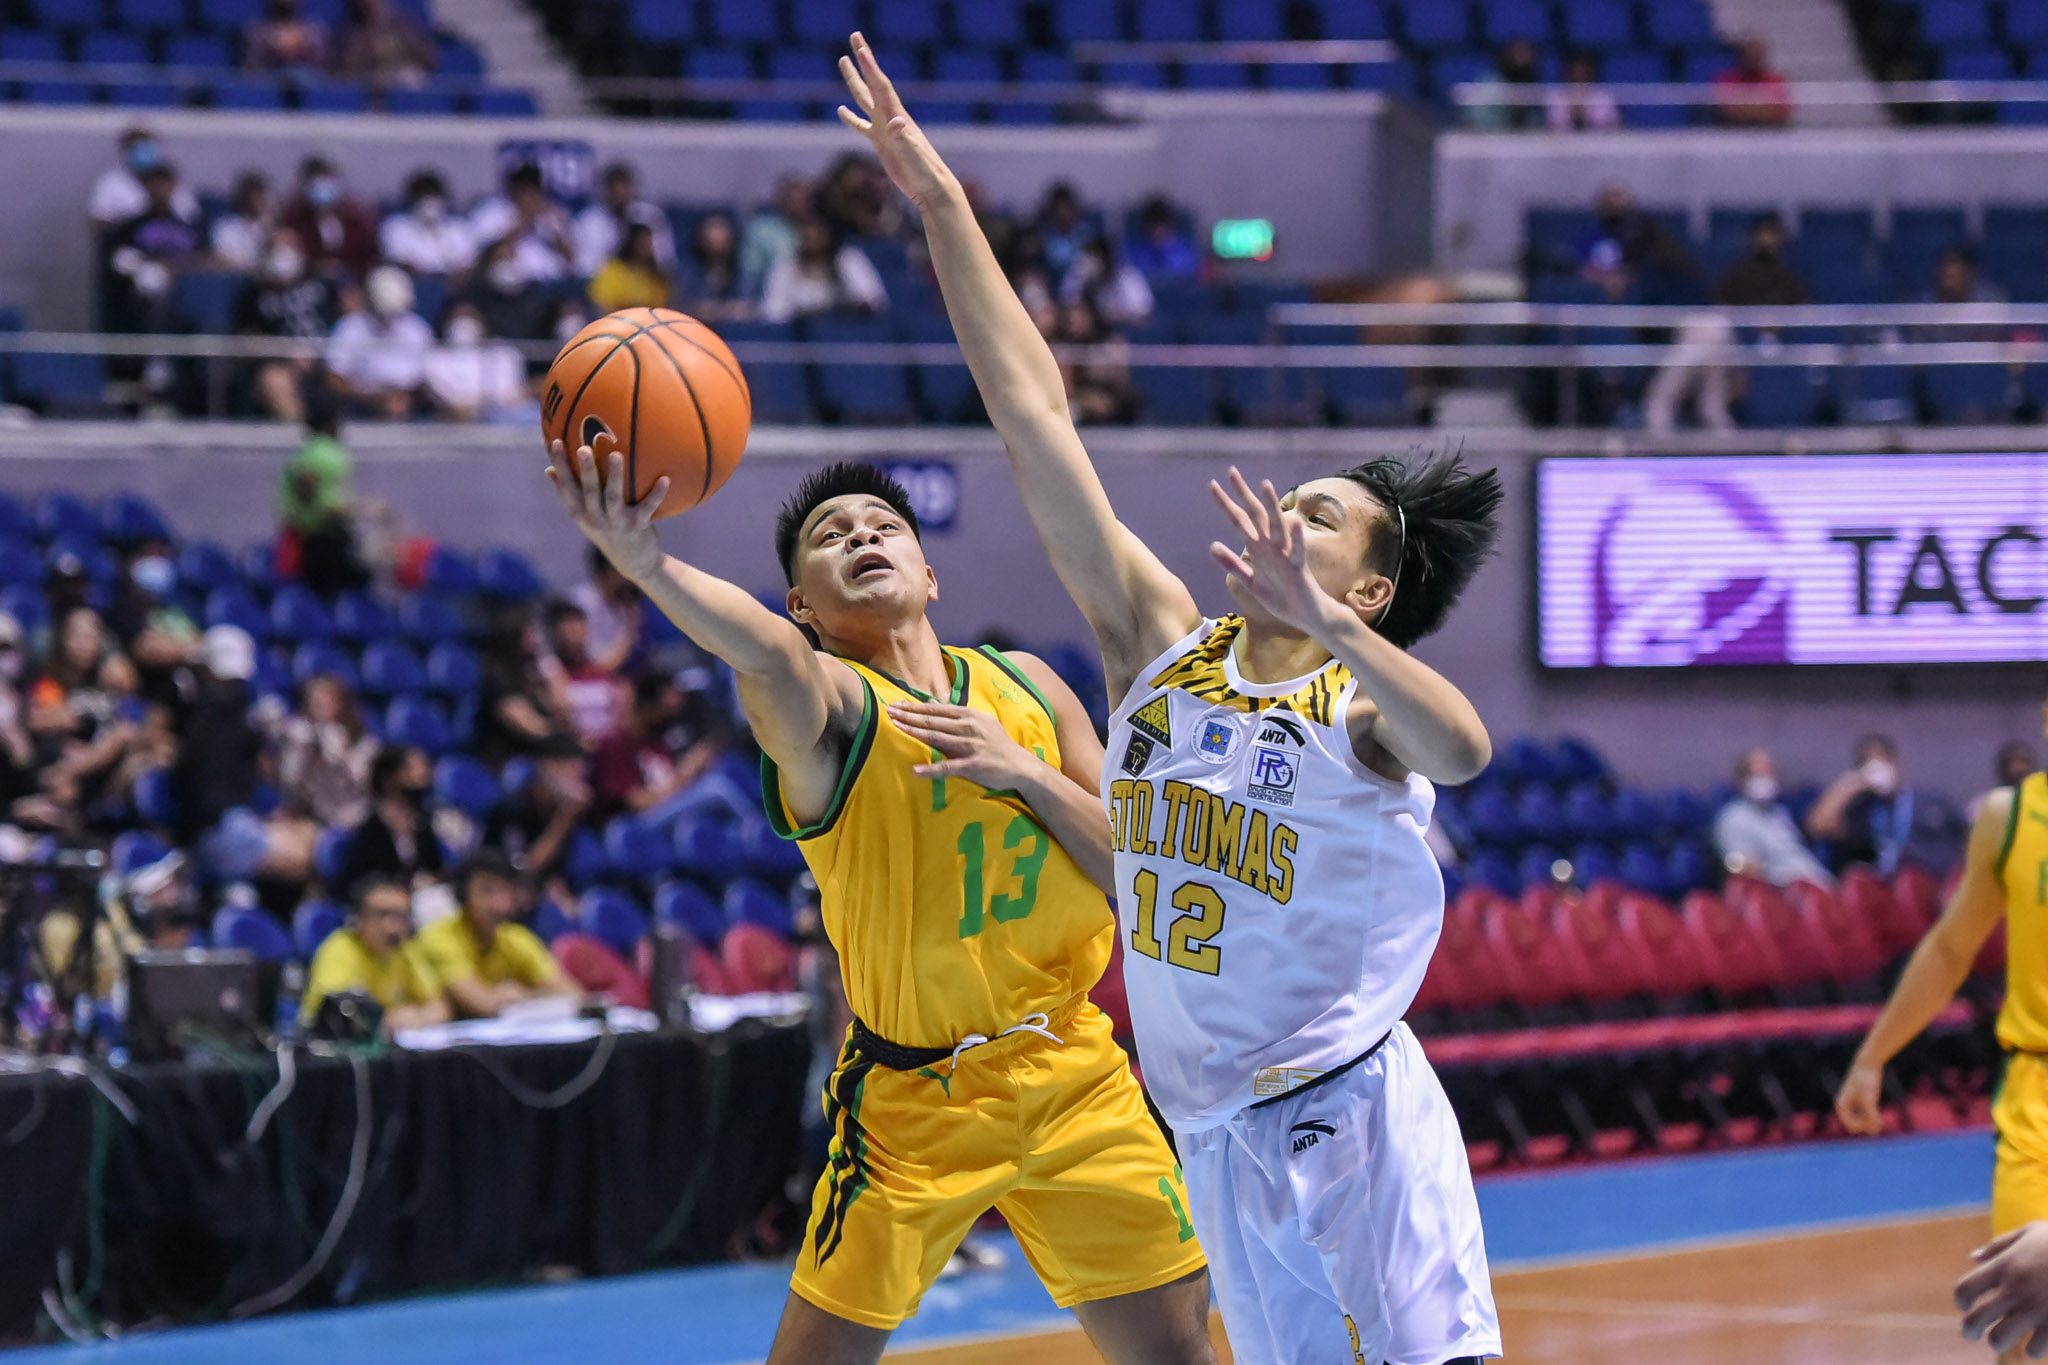 FEU torches Cabañero-less UST to end Season 85 campaign on high note